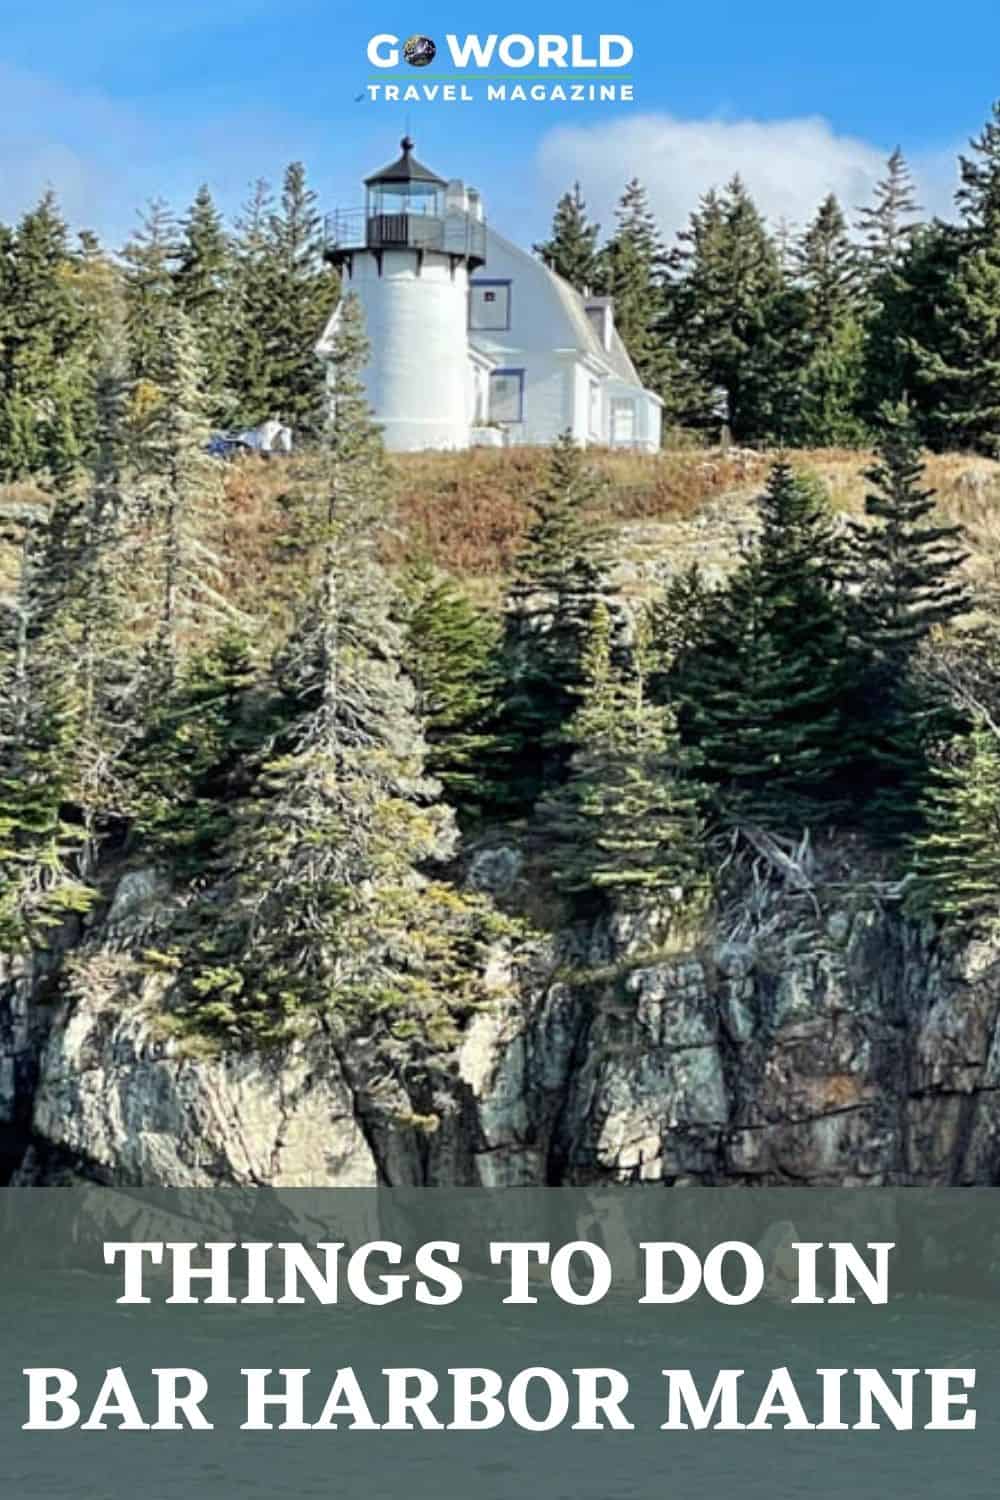 Looking for things to do in Bar Harbor, Maine? This guide covers activities in Acadia National Park and where to eat and stay in Bar Harbor. #maine #barharbormaine